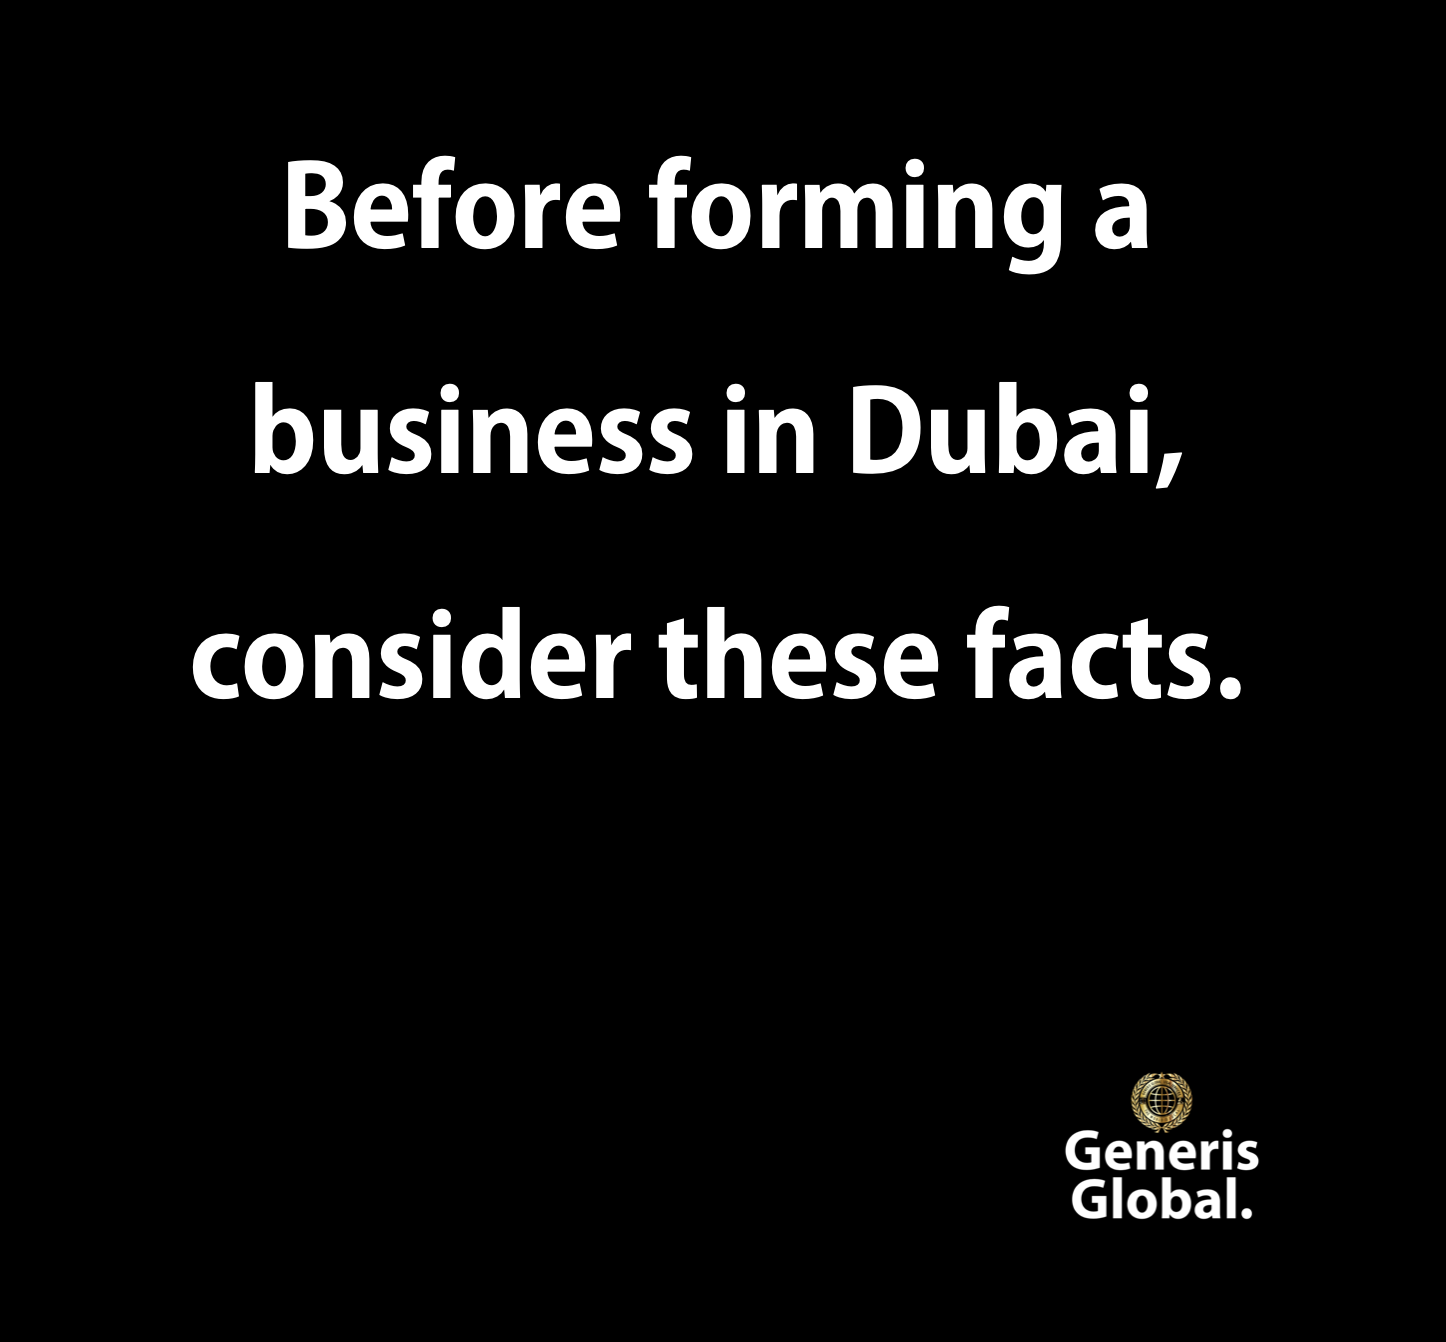 Before forming a business in Dubai, consider these facts